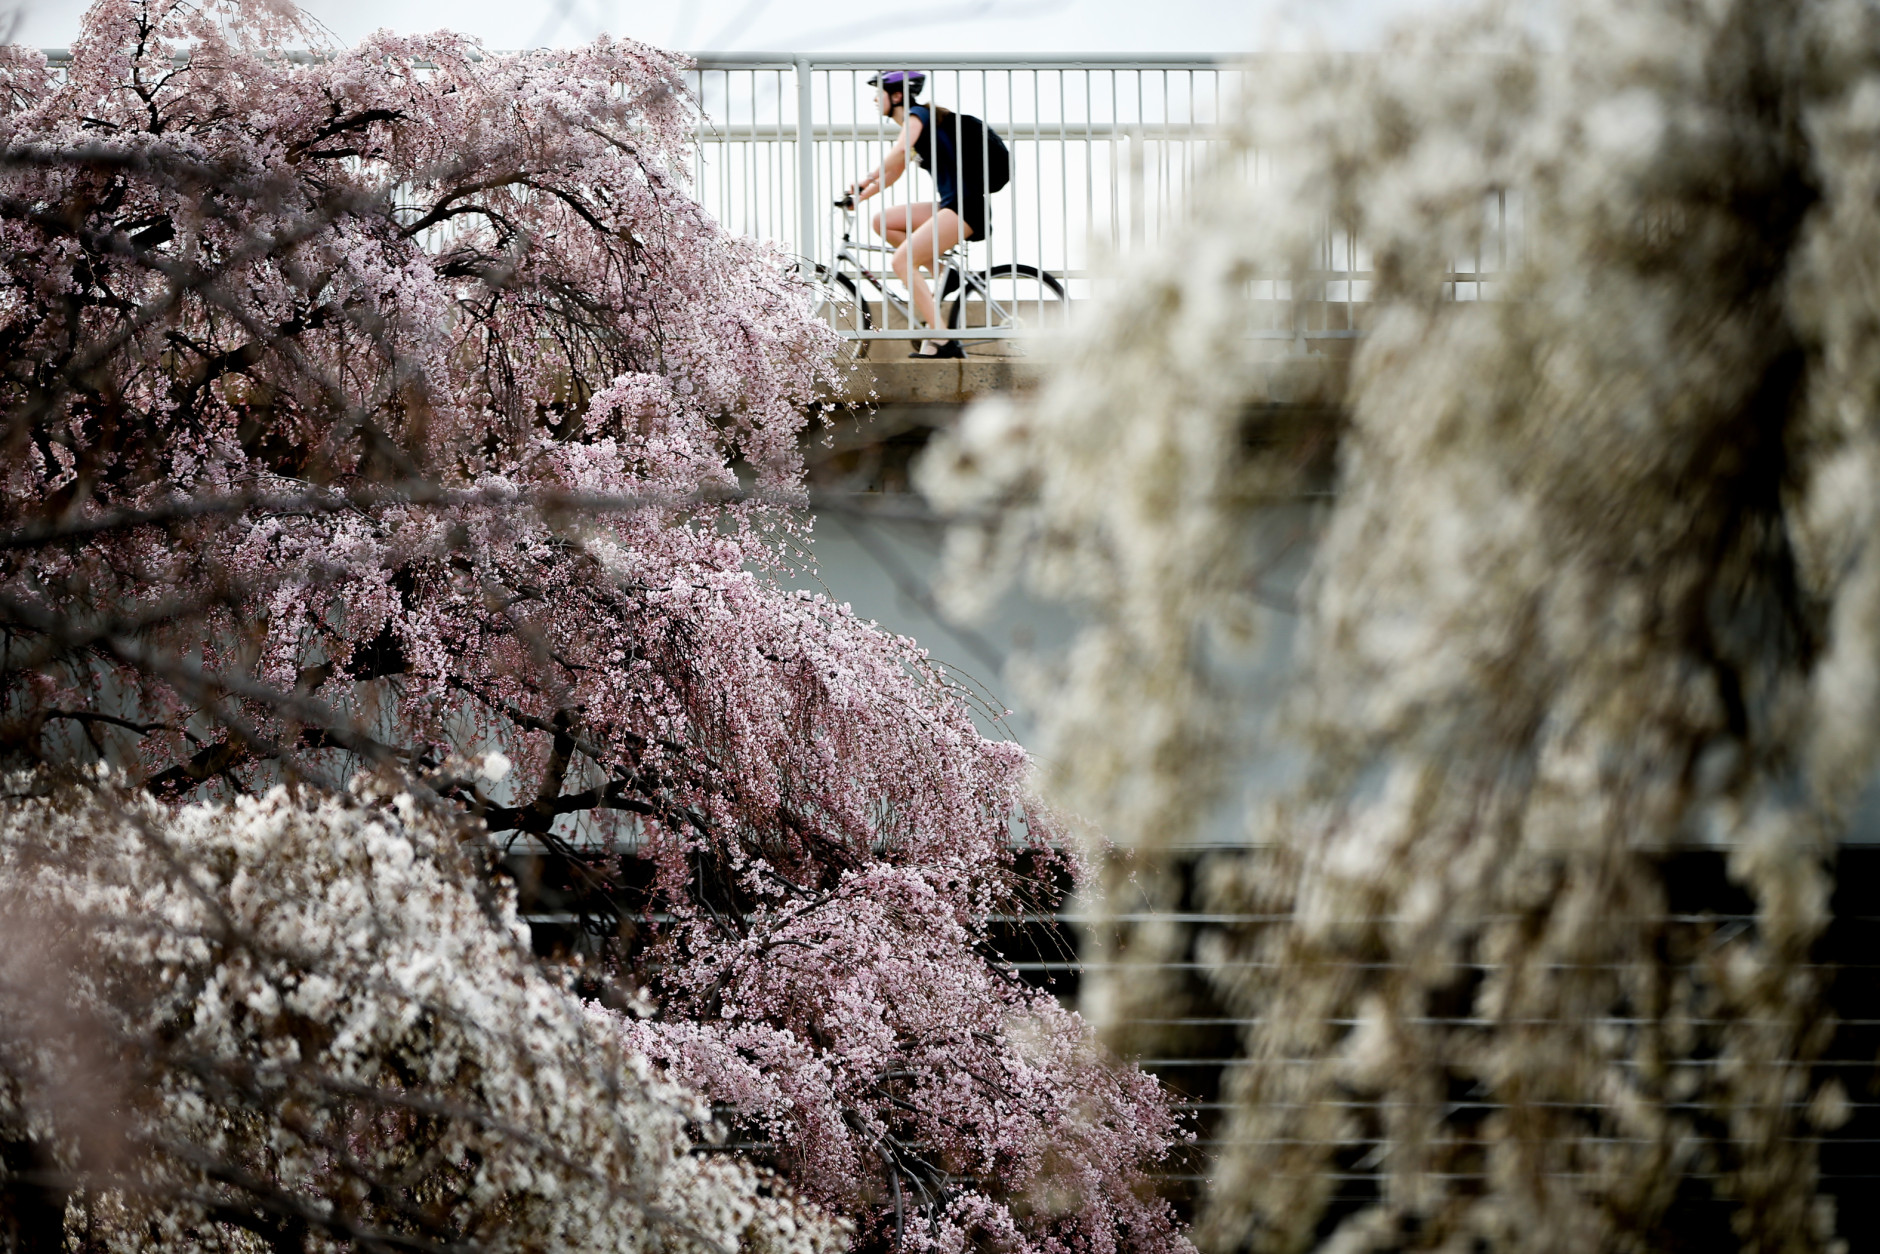 A bicyclist makes their way past cherry blossoms trees in Washington, Tuesday, April 7, 2015. Officials are calling for a peak bloom period from April 11-14th. (AP Photo/Andrew Harnik)